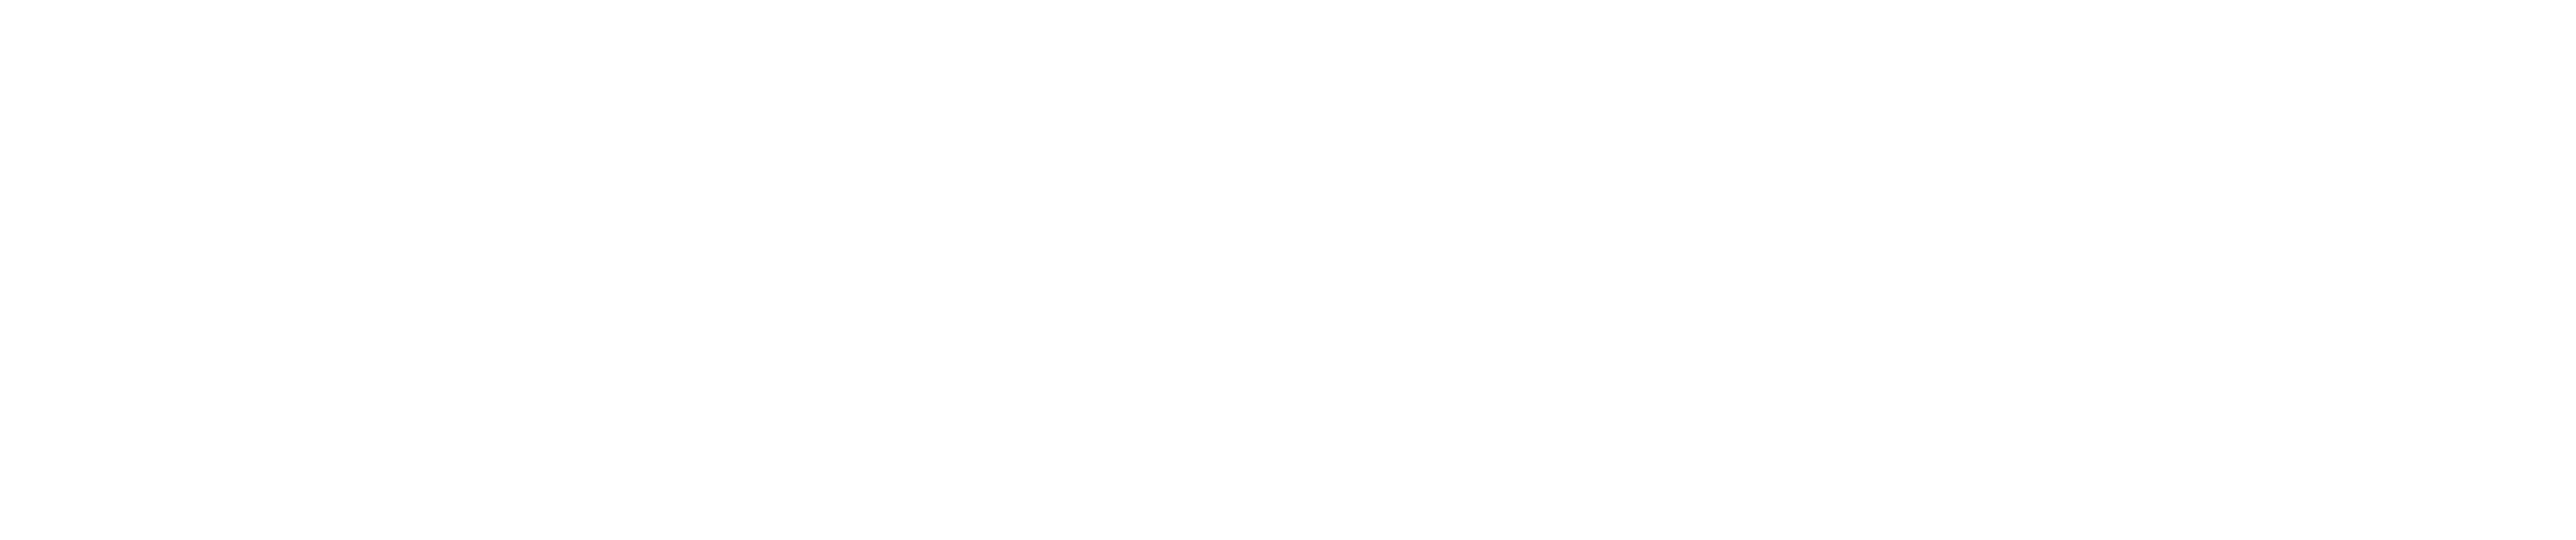 co-funded-by-eu-outline